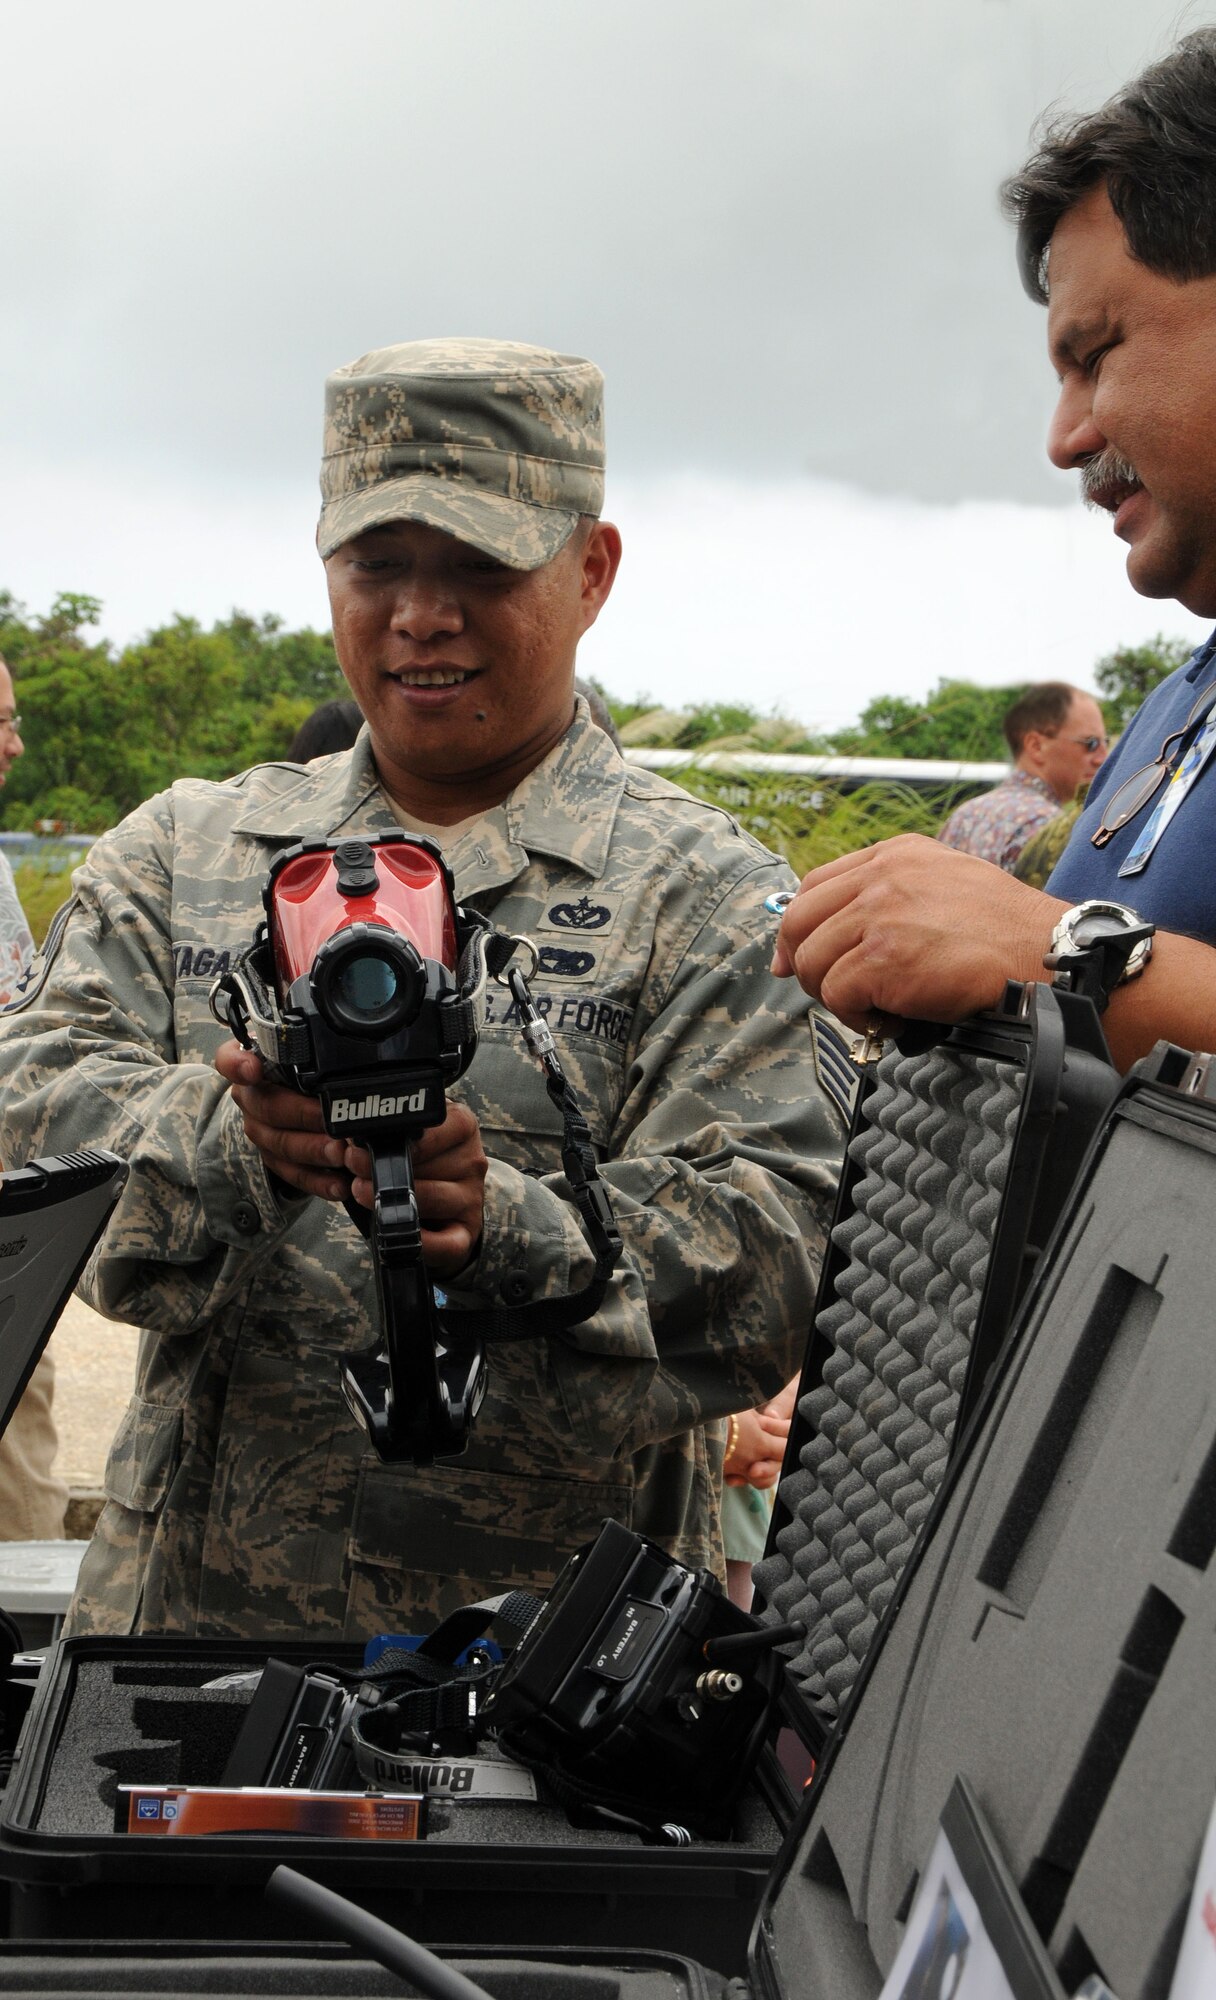 ANDERSEN AIR FORCE BASE, Guam - Staff Sgt. Francis Tagalog of the 36th Civil Engineer Squadron Fire Department explains how to use a thermal imaging camera at a DoD no-notice mass causality airport disaster workshop at Won Pat International Airport July 31. One purpose of workshop was to show emergency response elements what equipment and capabilities are available around Guam as an effort to improve their response during future emergency situations. (U.S. Air Force photo by Airman 1st Class Courtney Witt)